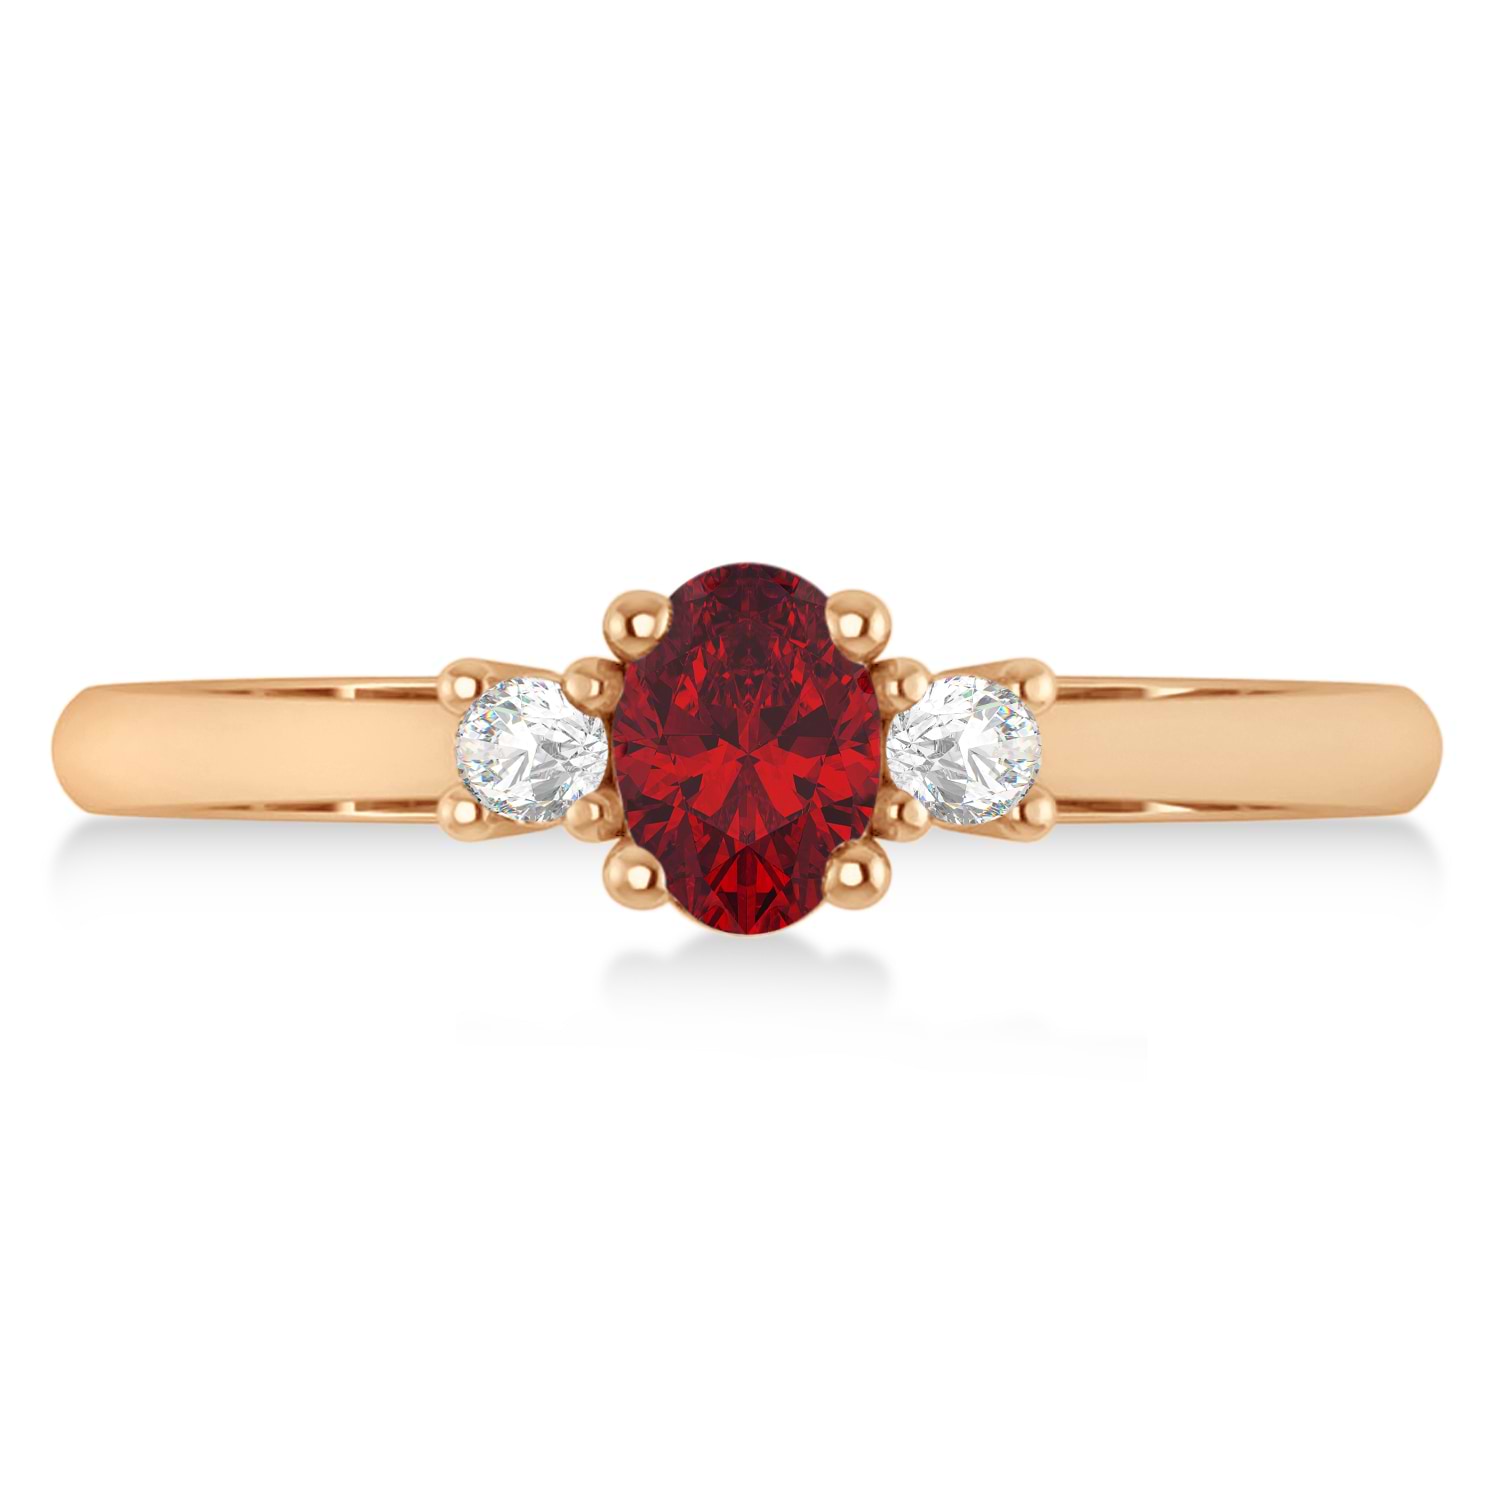 Small Oval Ruby & Diamond Three-Stone Engagement Ring 14k Rose Gold (0.60ct)